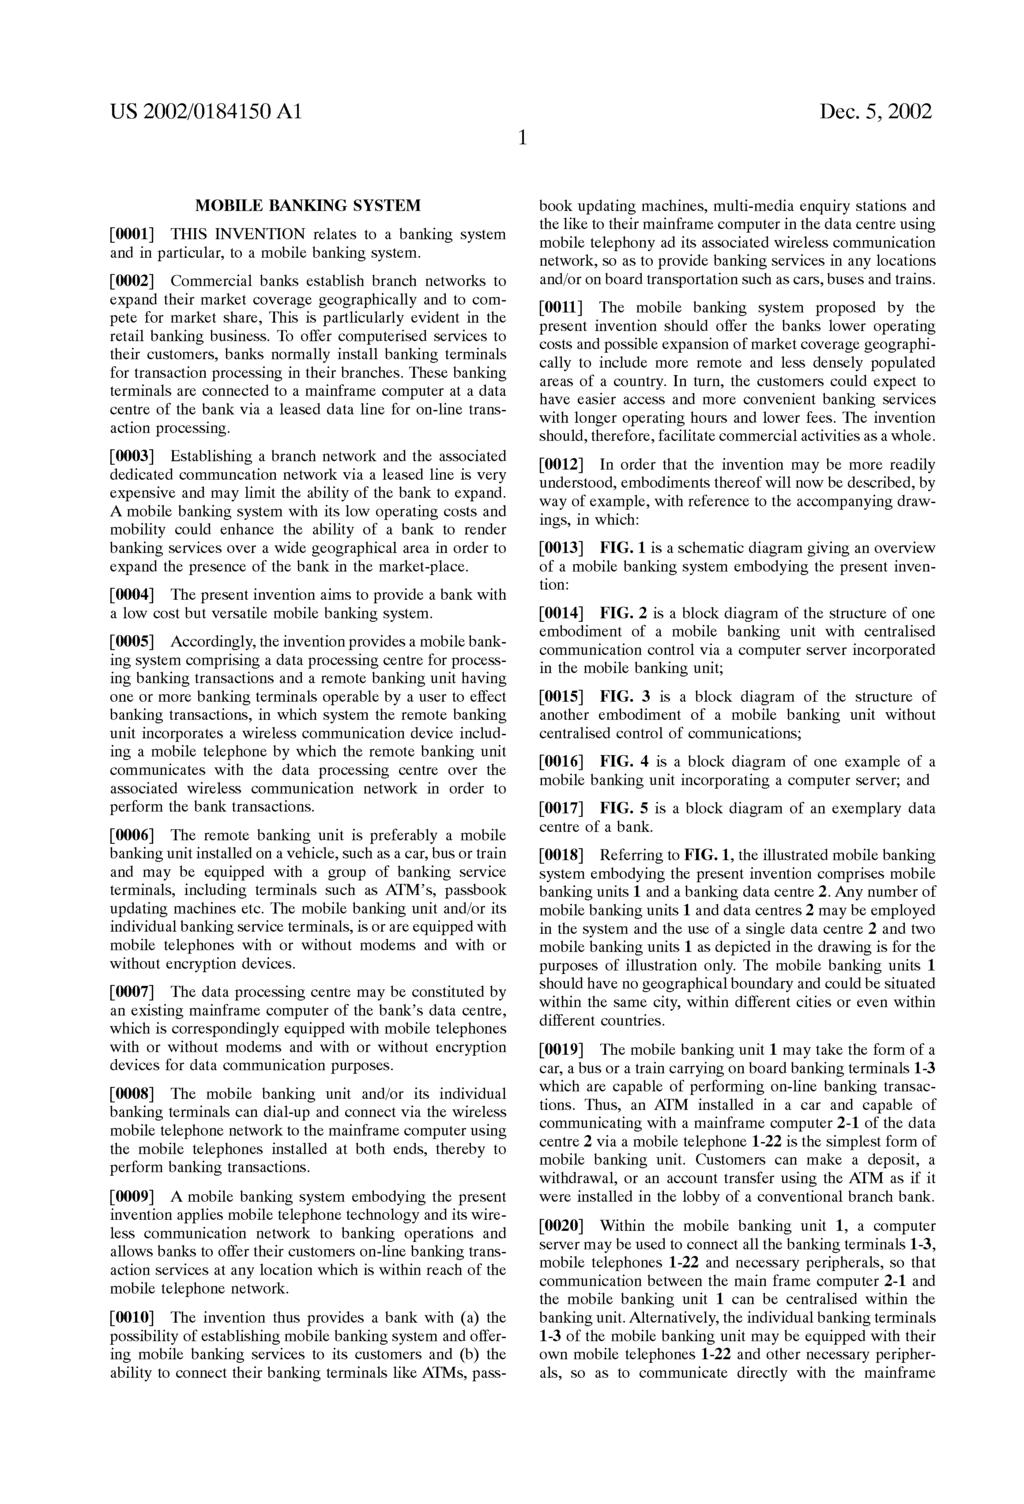 US 2002/0184150 A1 Dec. 5, 2002 MOBILE BANKING SYSTEM [0001] THIS INVENTION relates to a banking system and in particular, to a mobile banking system.